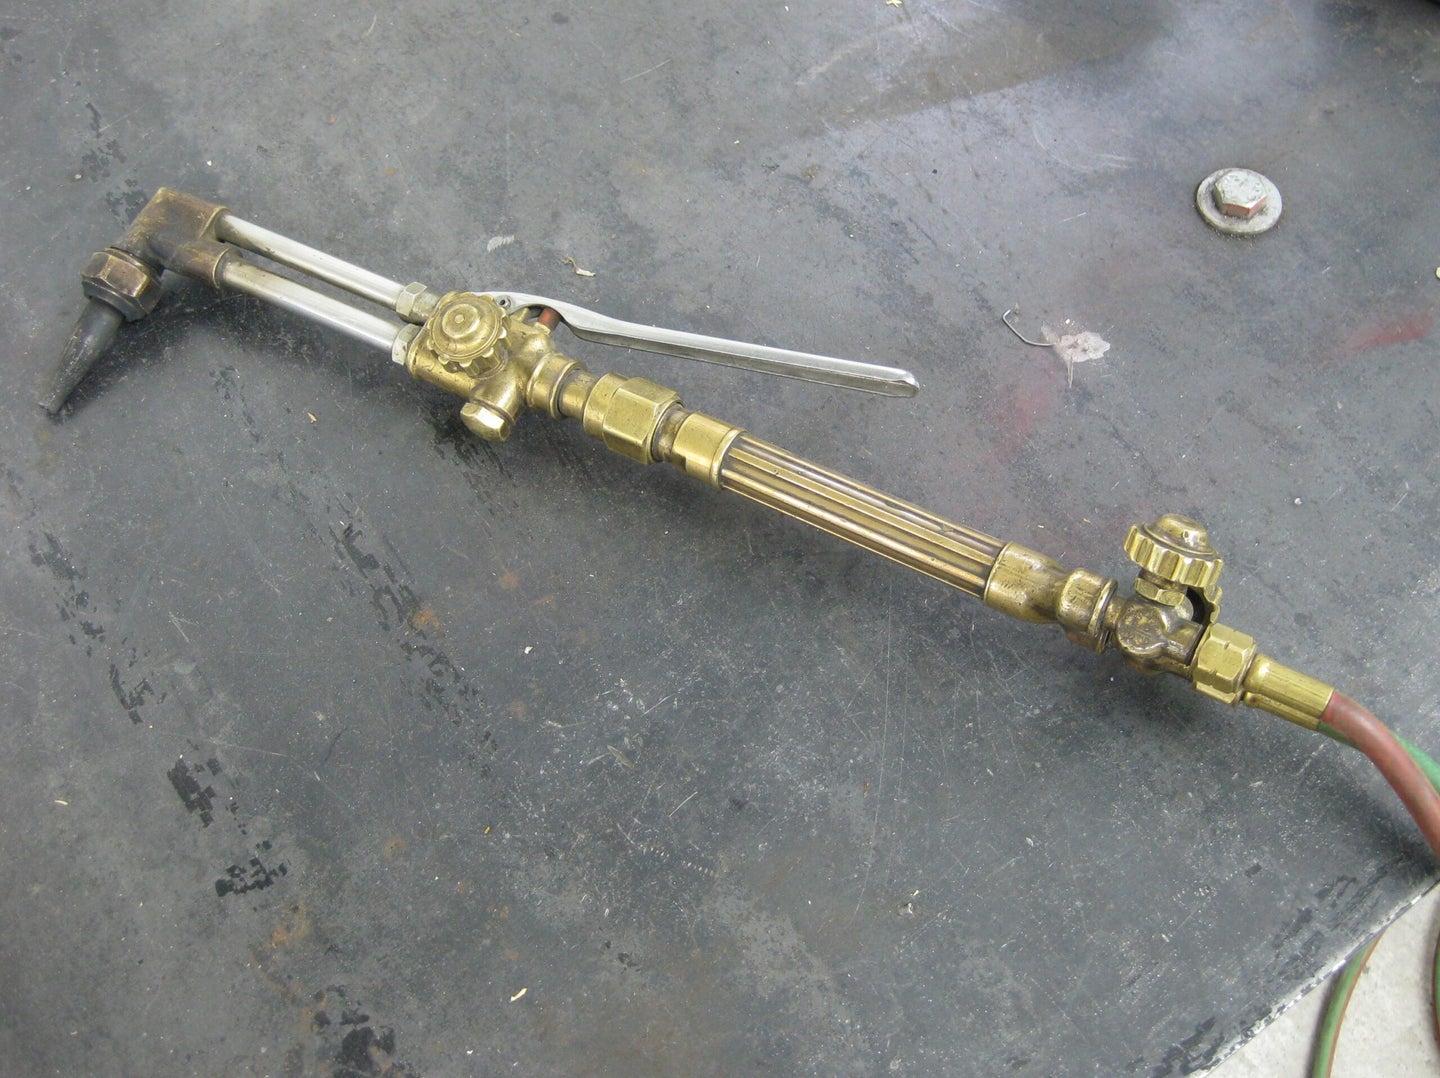 An inactive oxy-acetylene torch on a concrete floor.